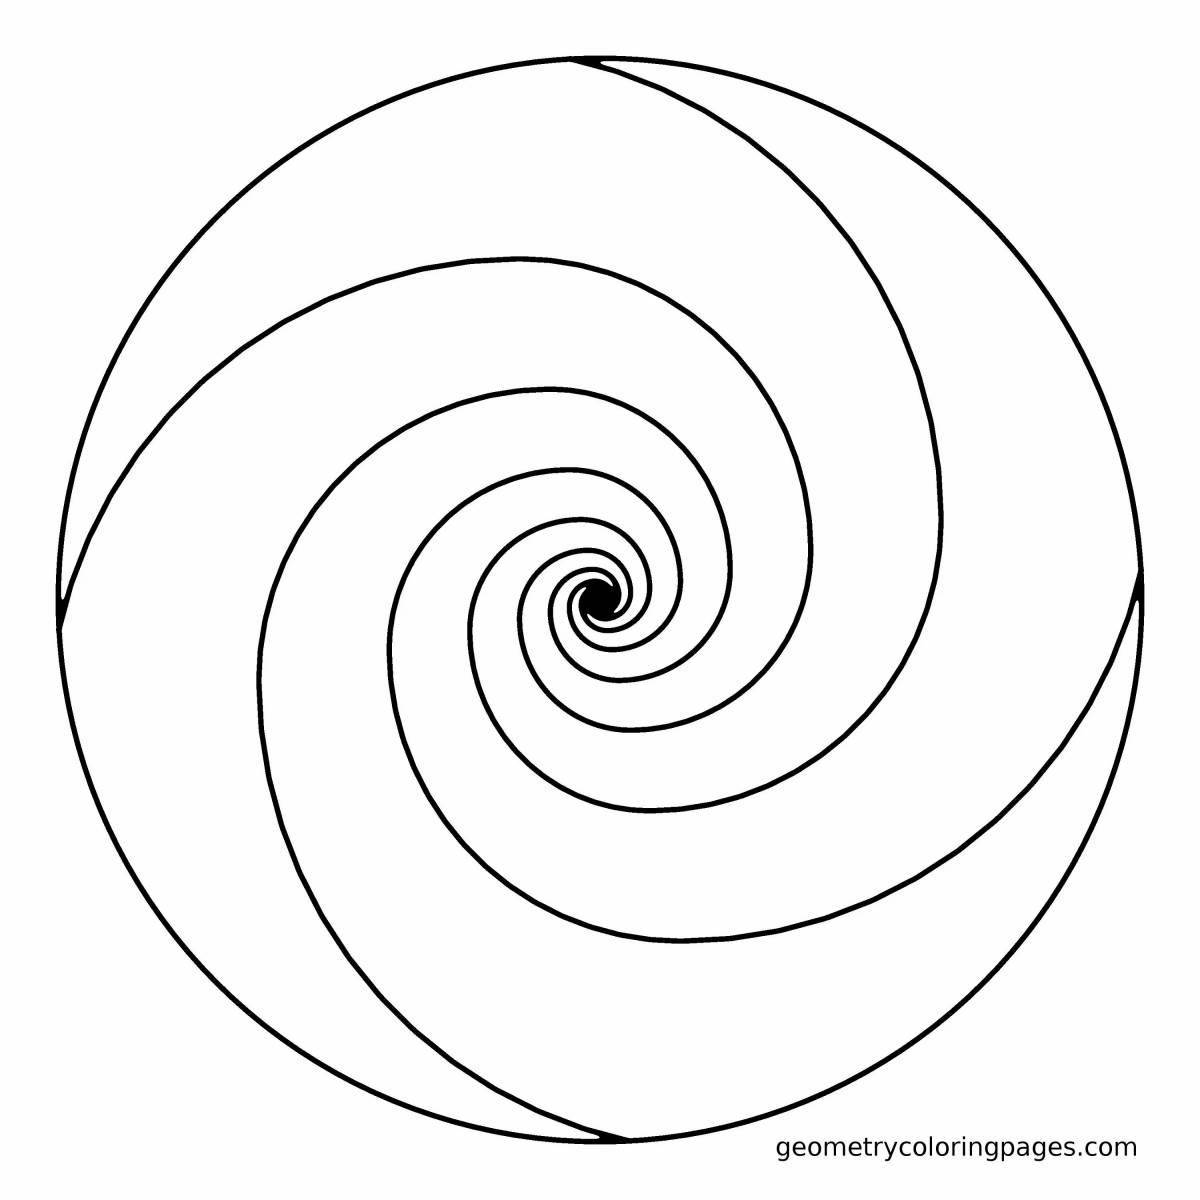 Fascinating spiral line coloring page